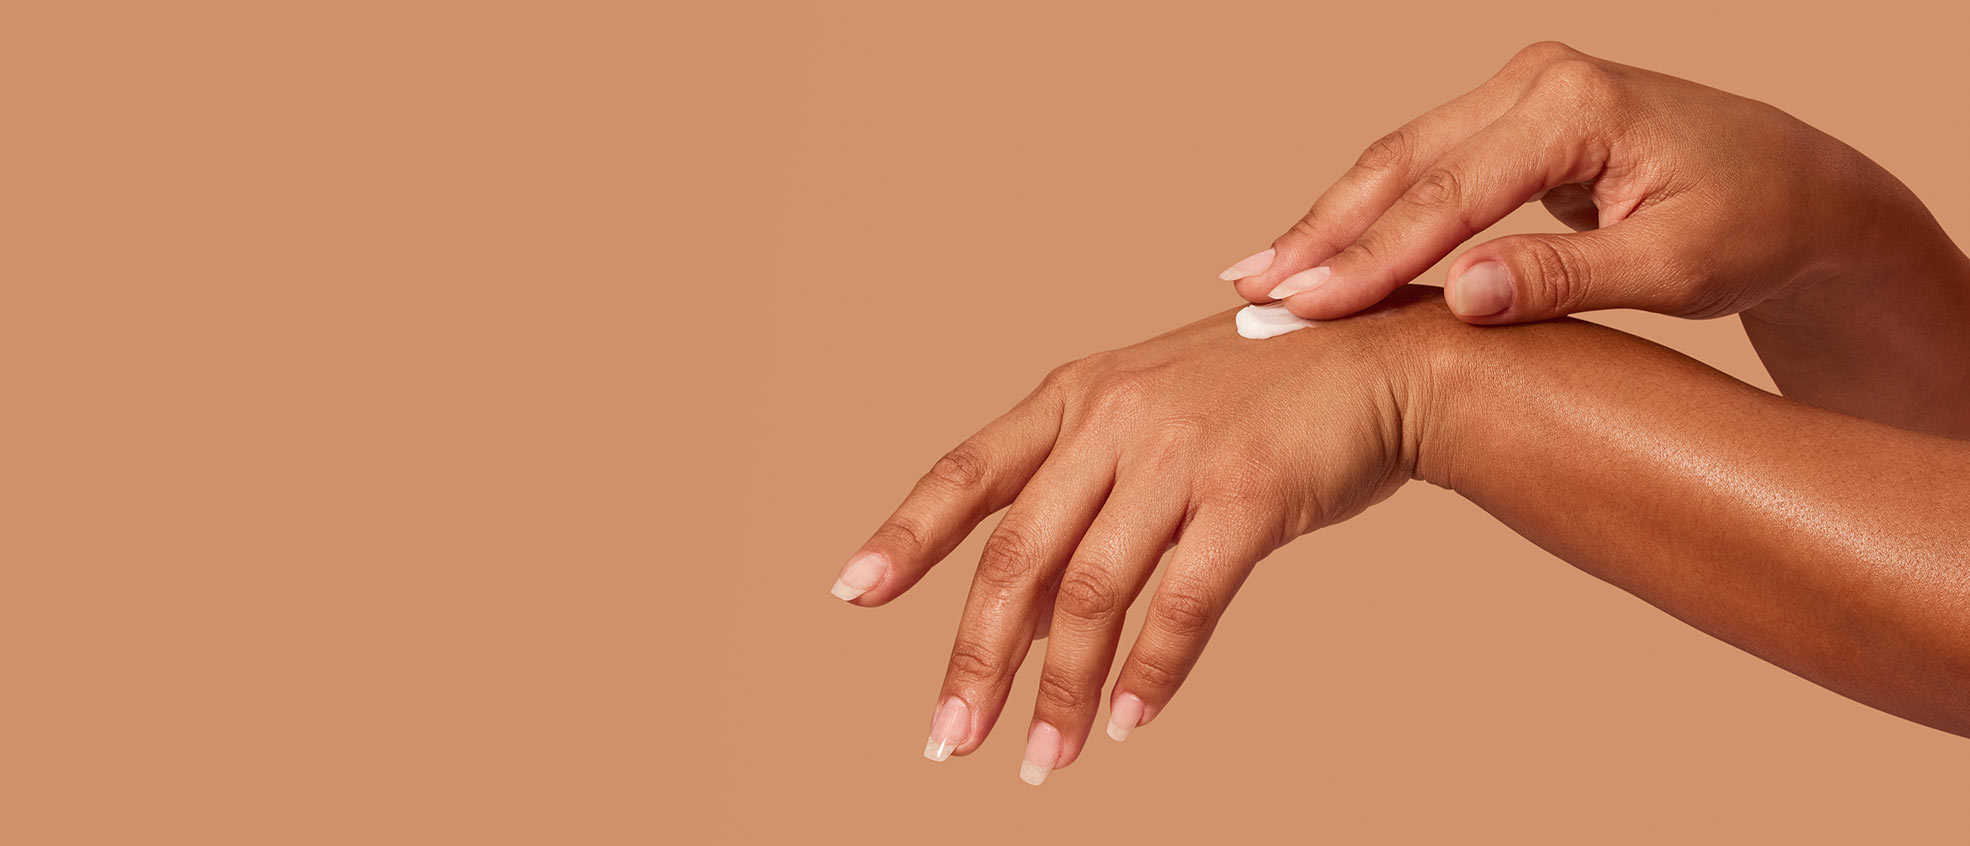 Closeup of a woman’s hands applying MONAT’s Silky & Soothing Hand Cream over a light peach background.